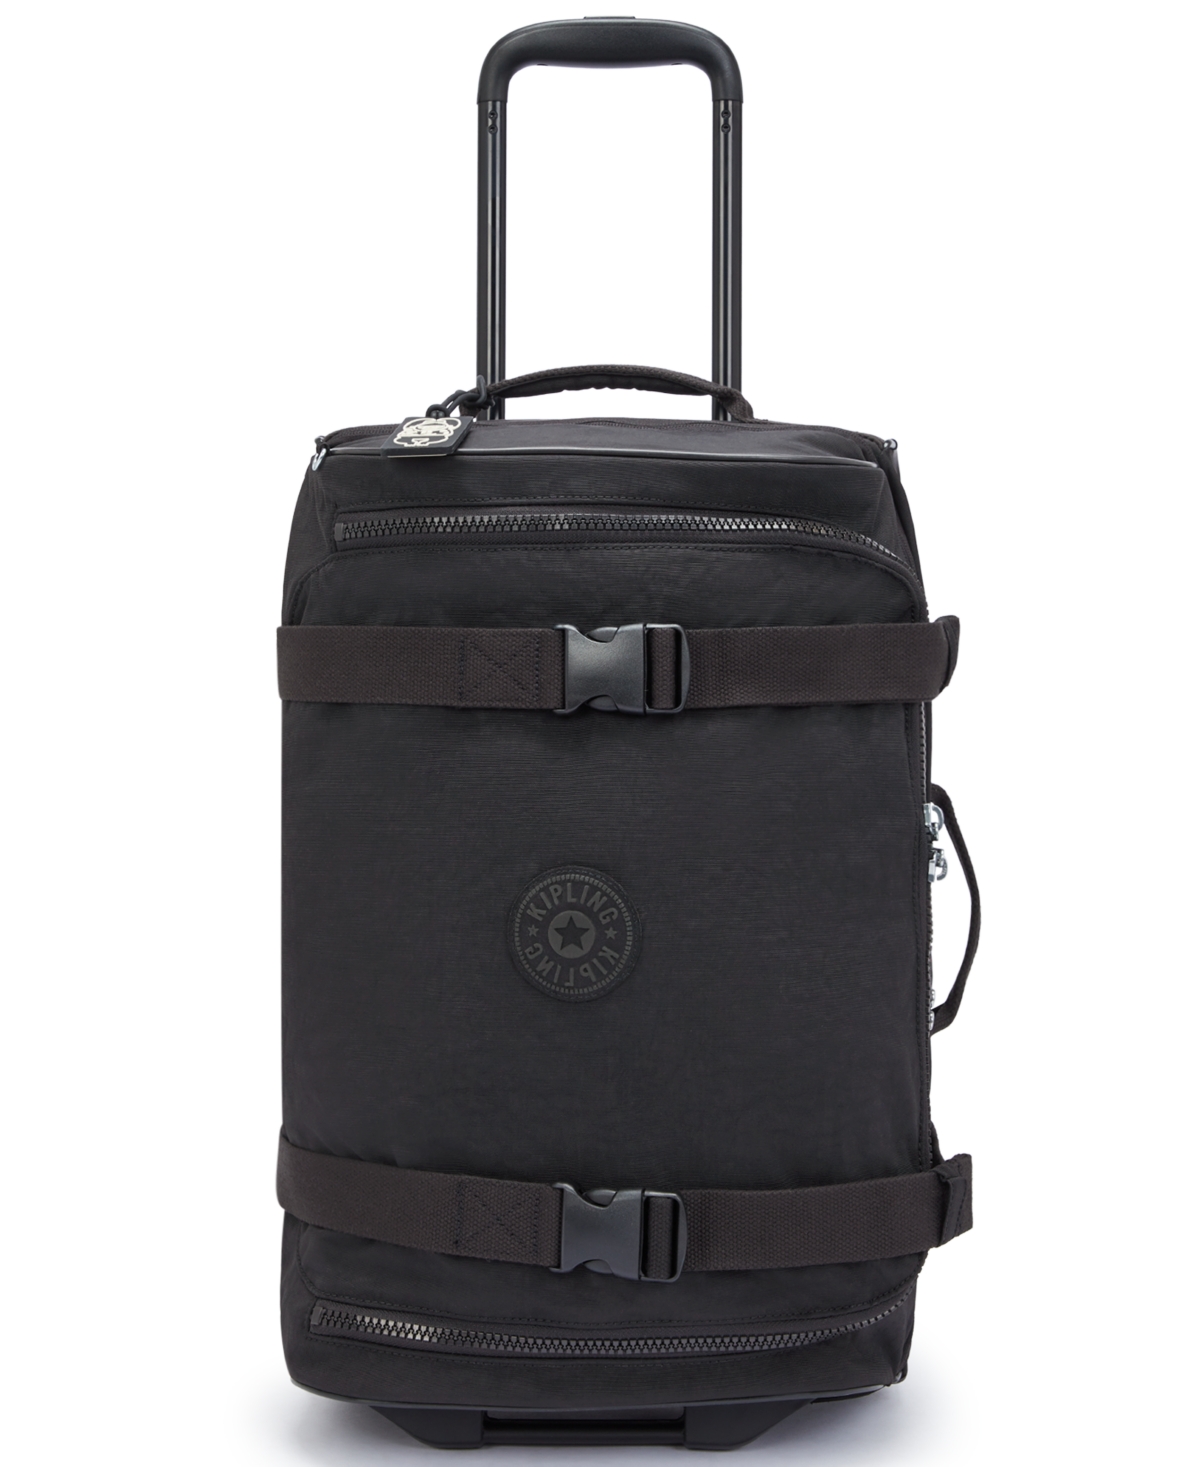 Aviana Small Carry-On Rolling Luggage - Black Noir